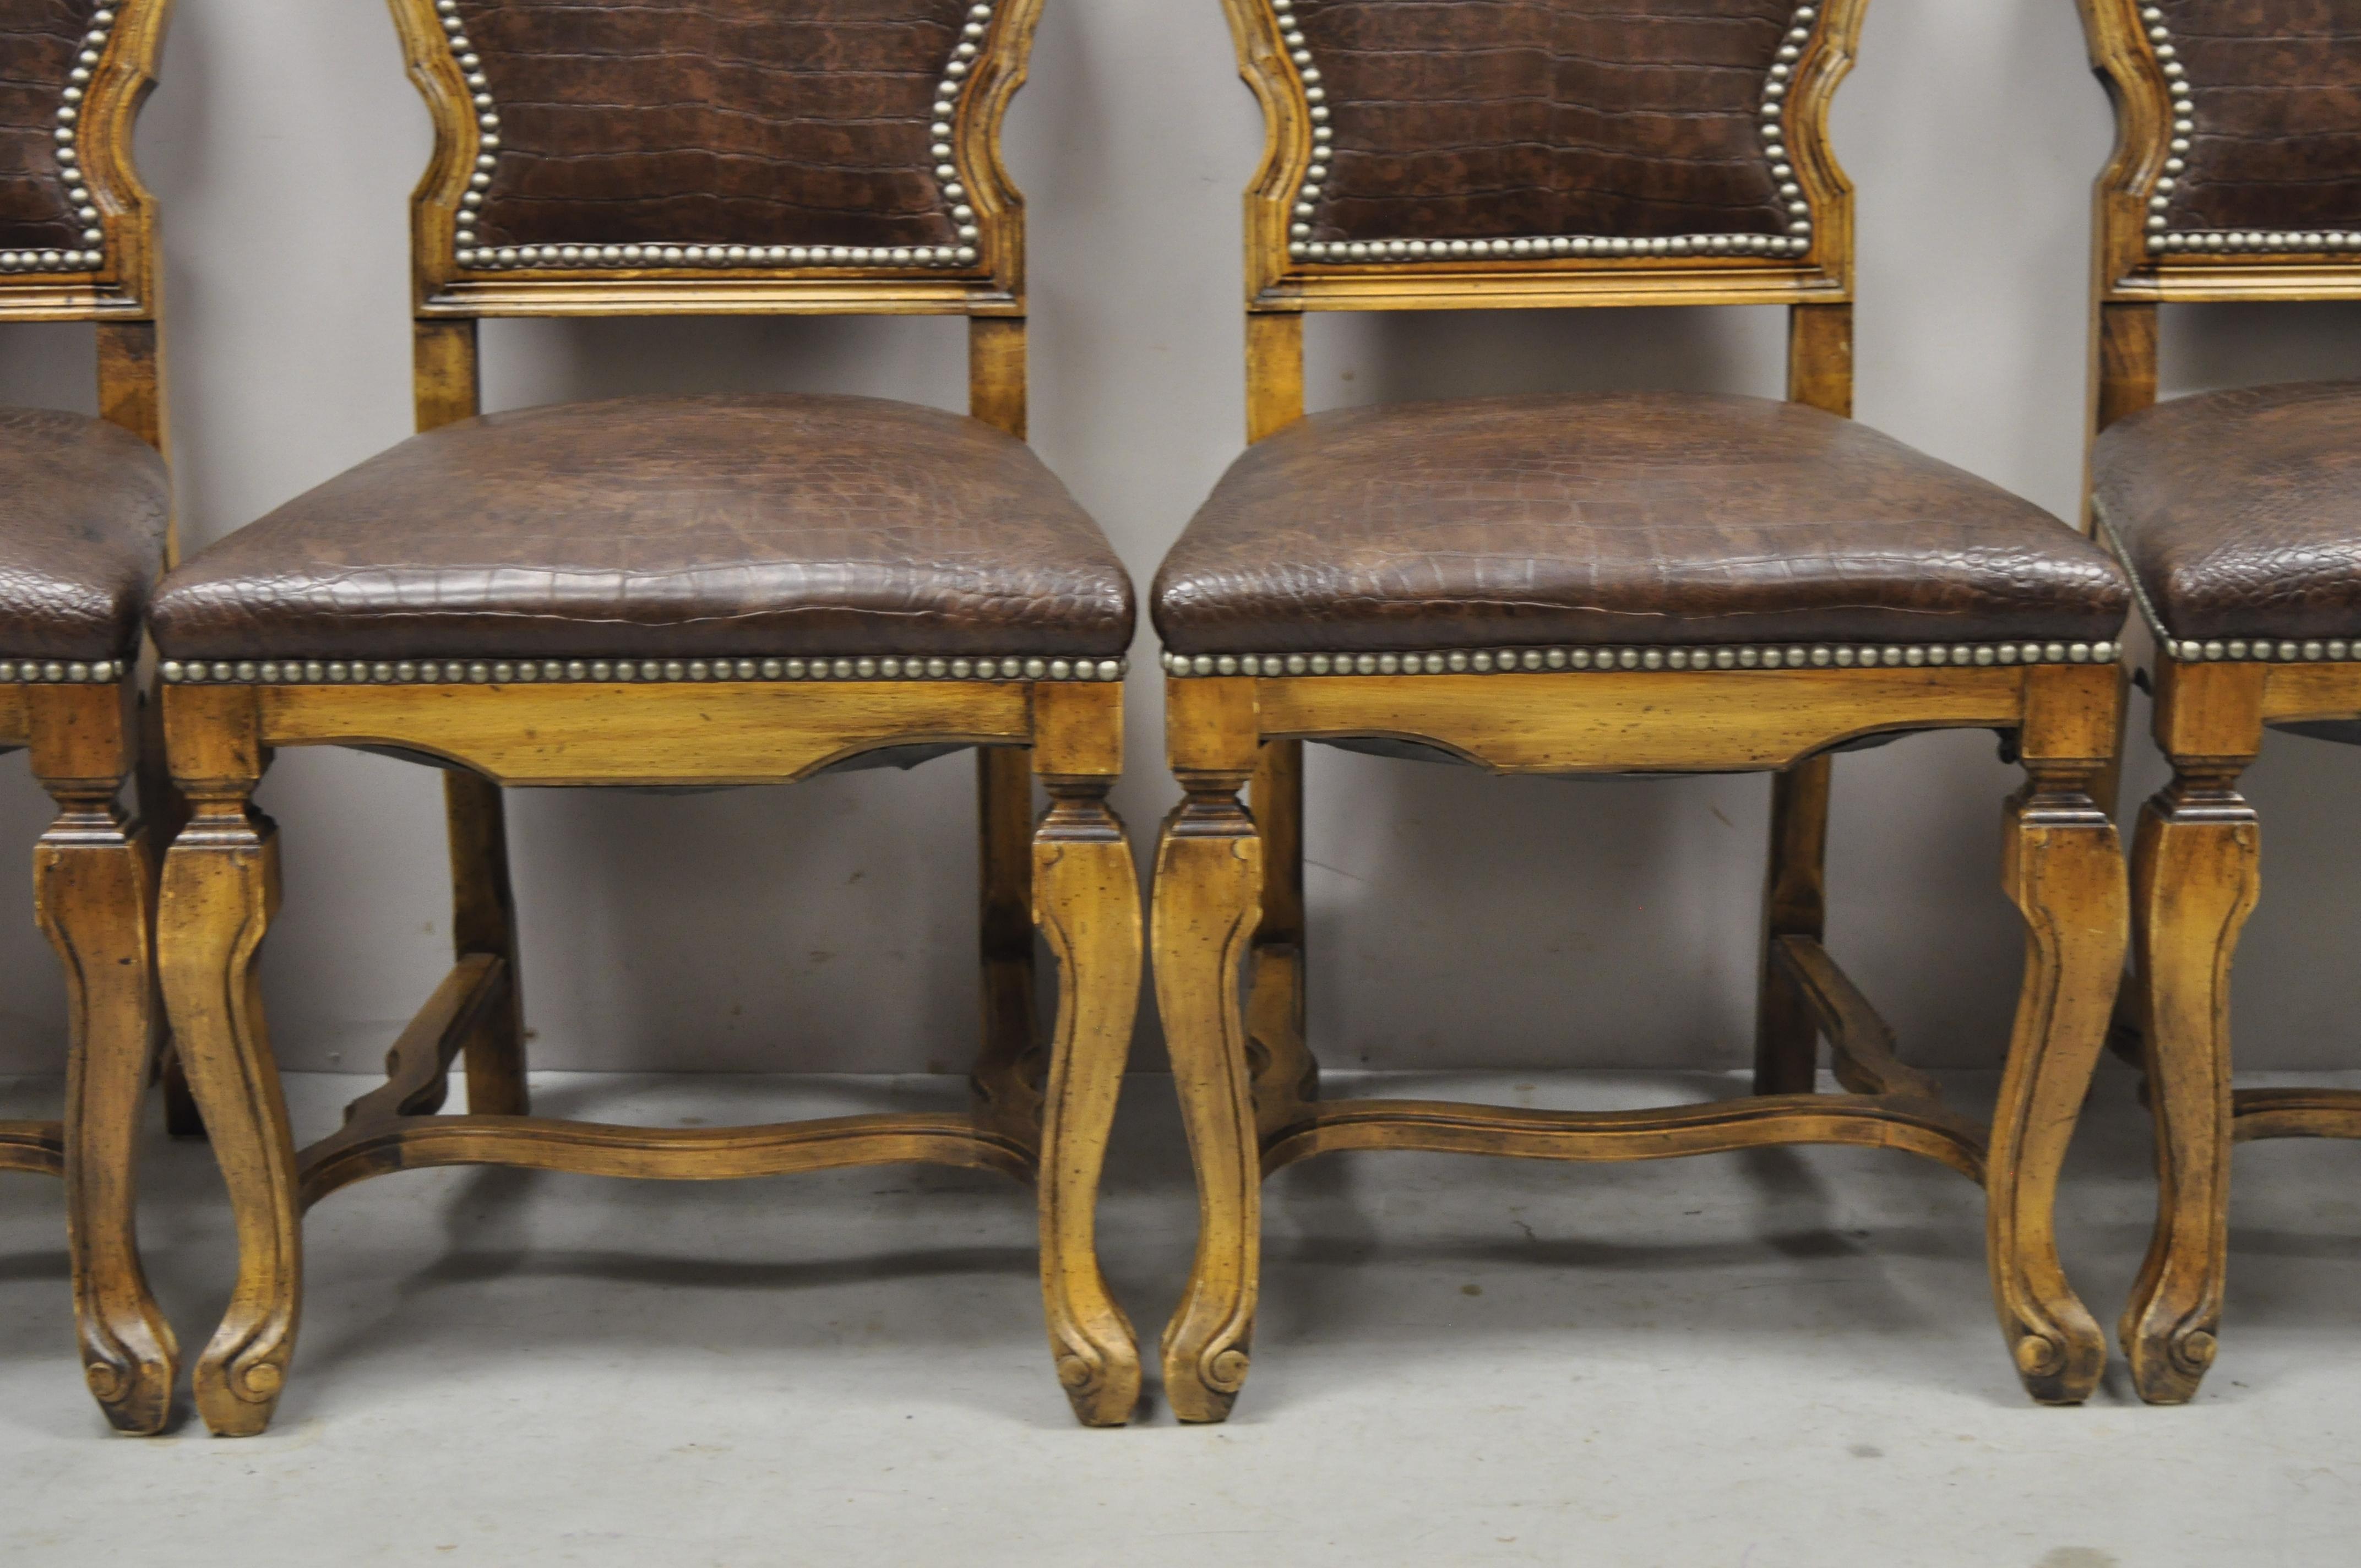 Italian Baroque Rococo Carved Wood Brown Reptile Print Dining Chairs, Set of 4 In Good Condition For Sale In Philadelphia, PA